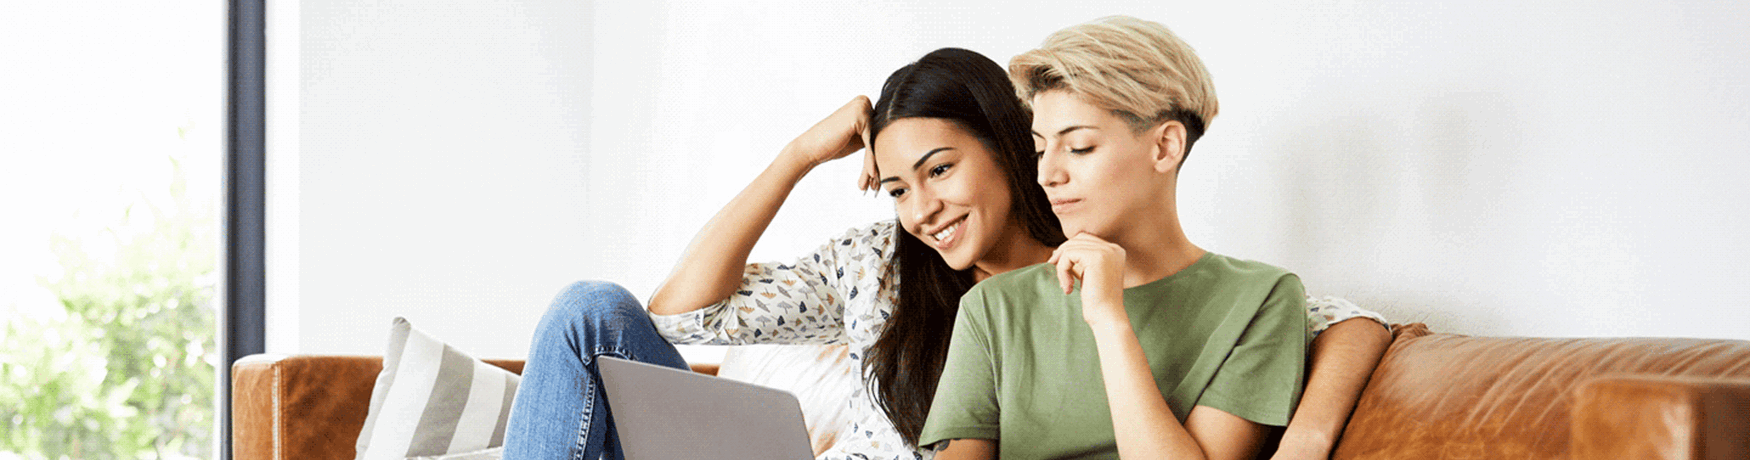 Two young women smiling on a couch, looking at a laptop